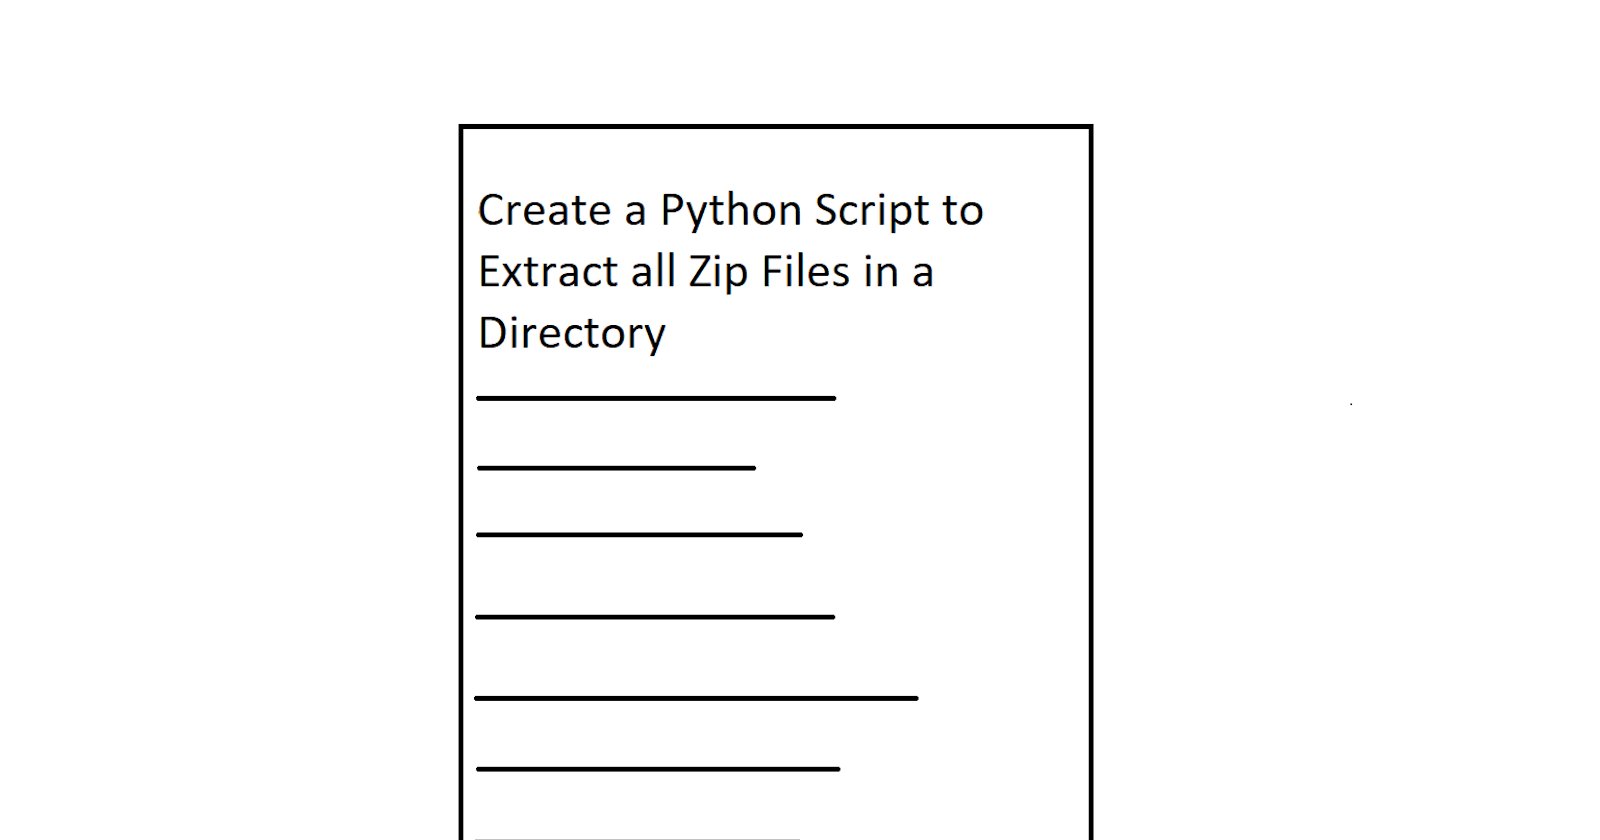 Create a Python Script to Extract all Zip Files in a Directory